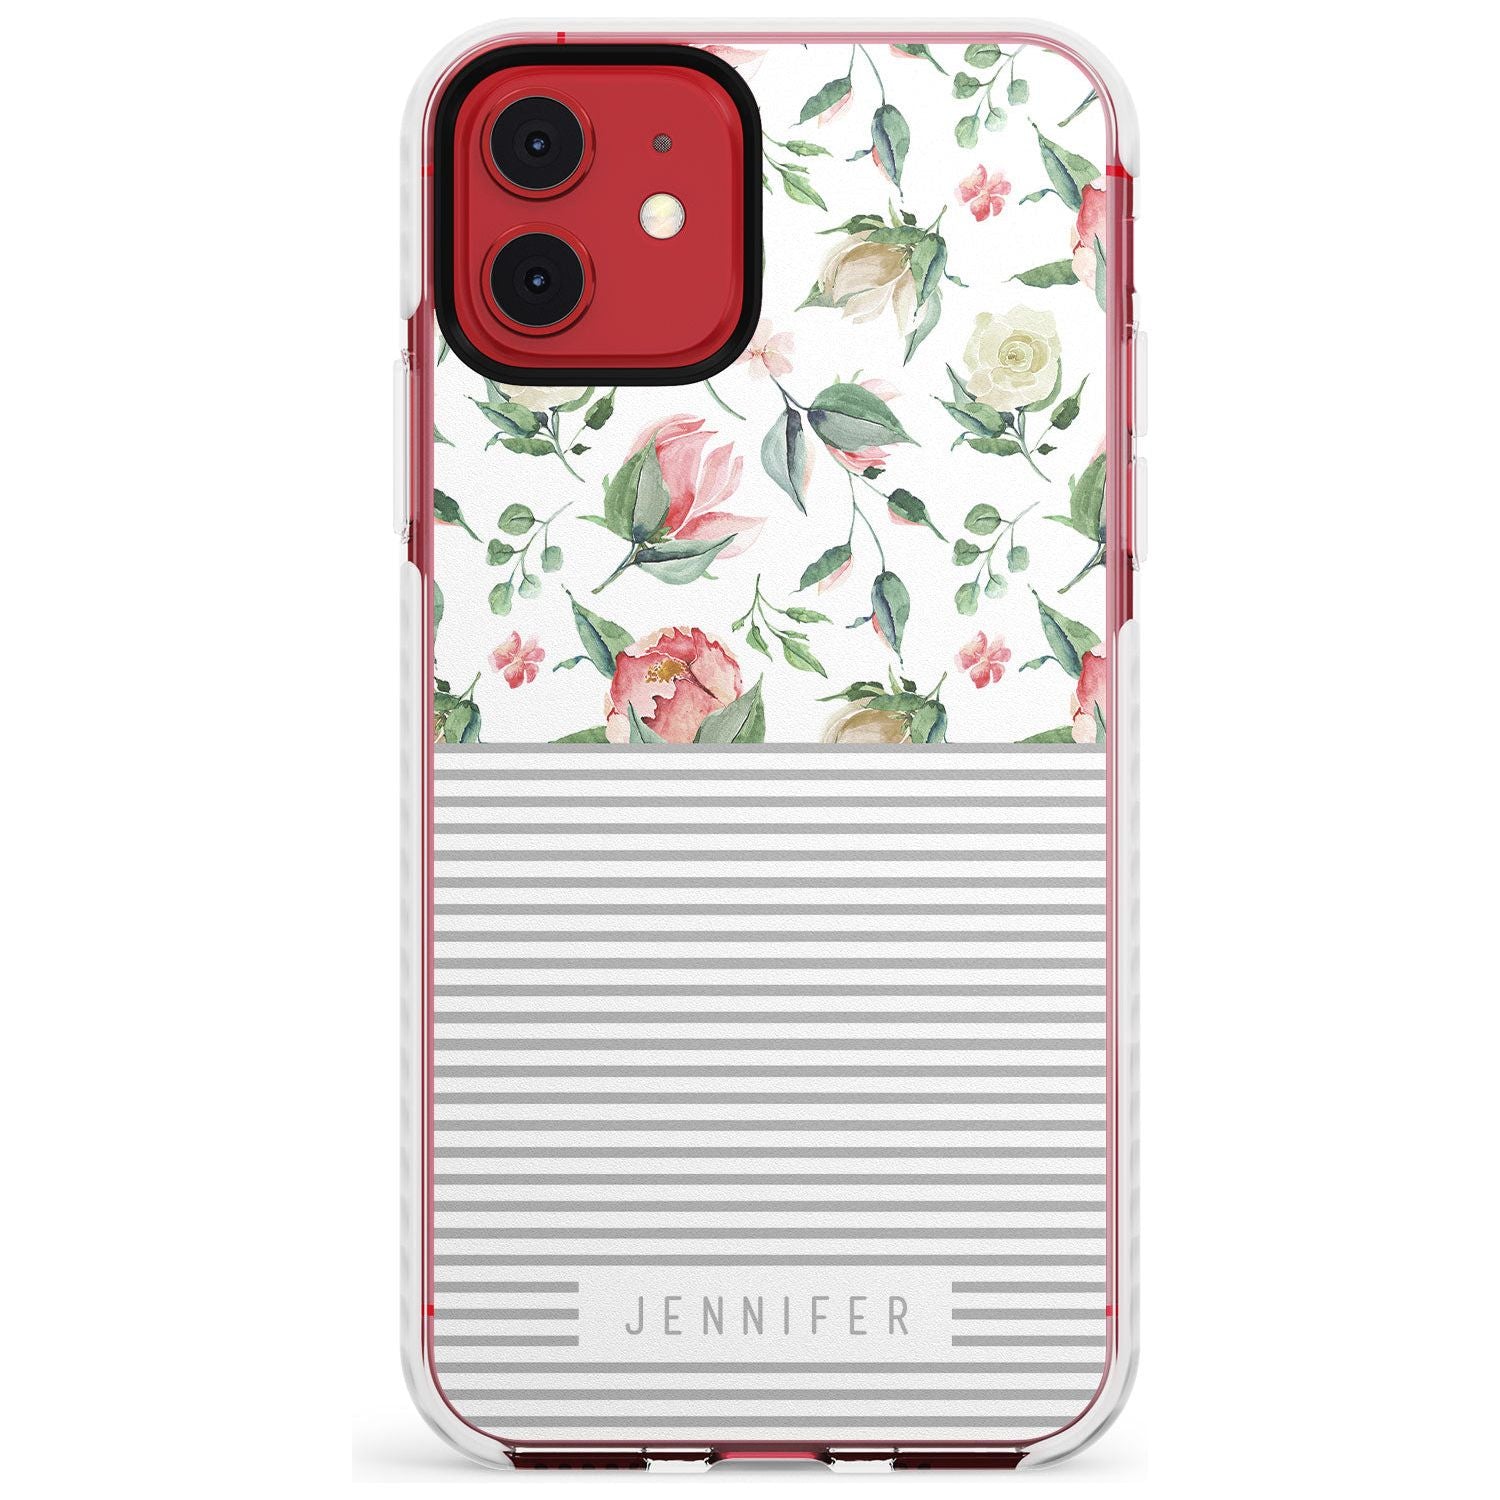 Light Floral Pattern & Stripes Slim TPU Phone Case for iPhone 11